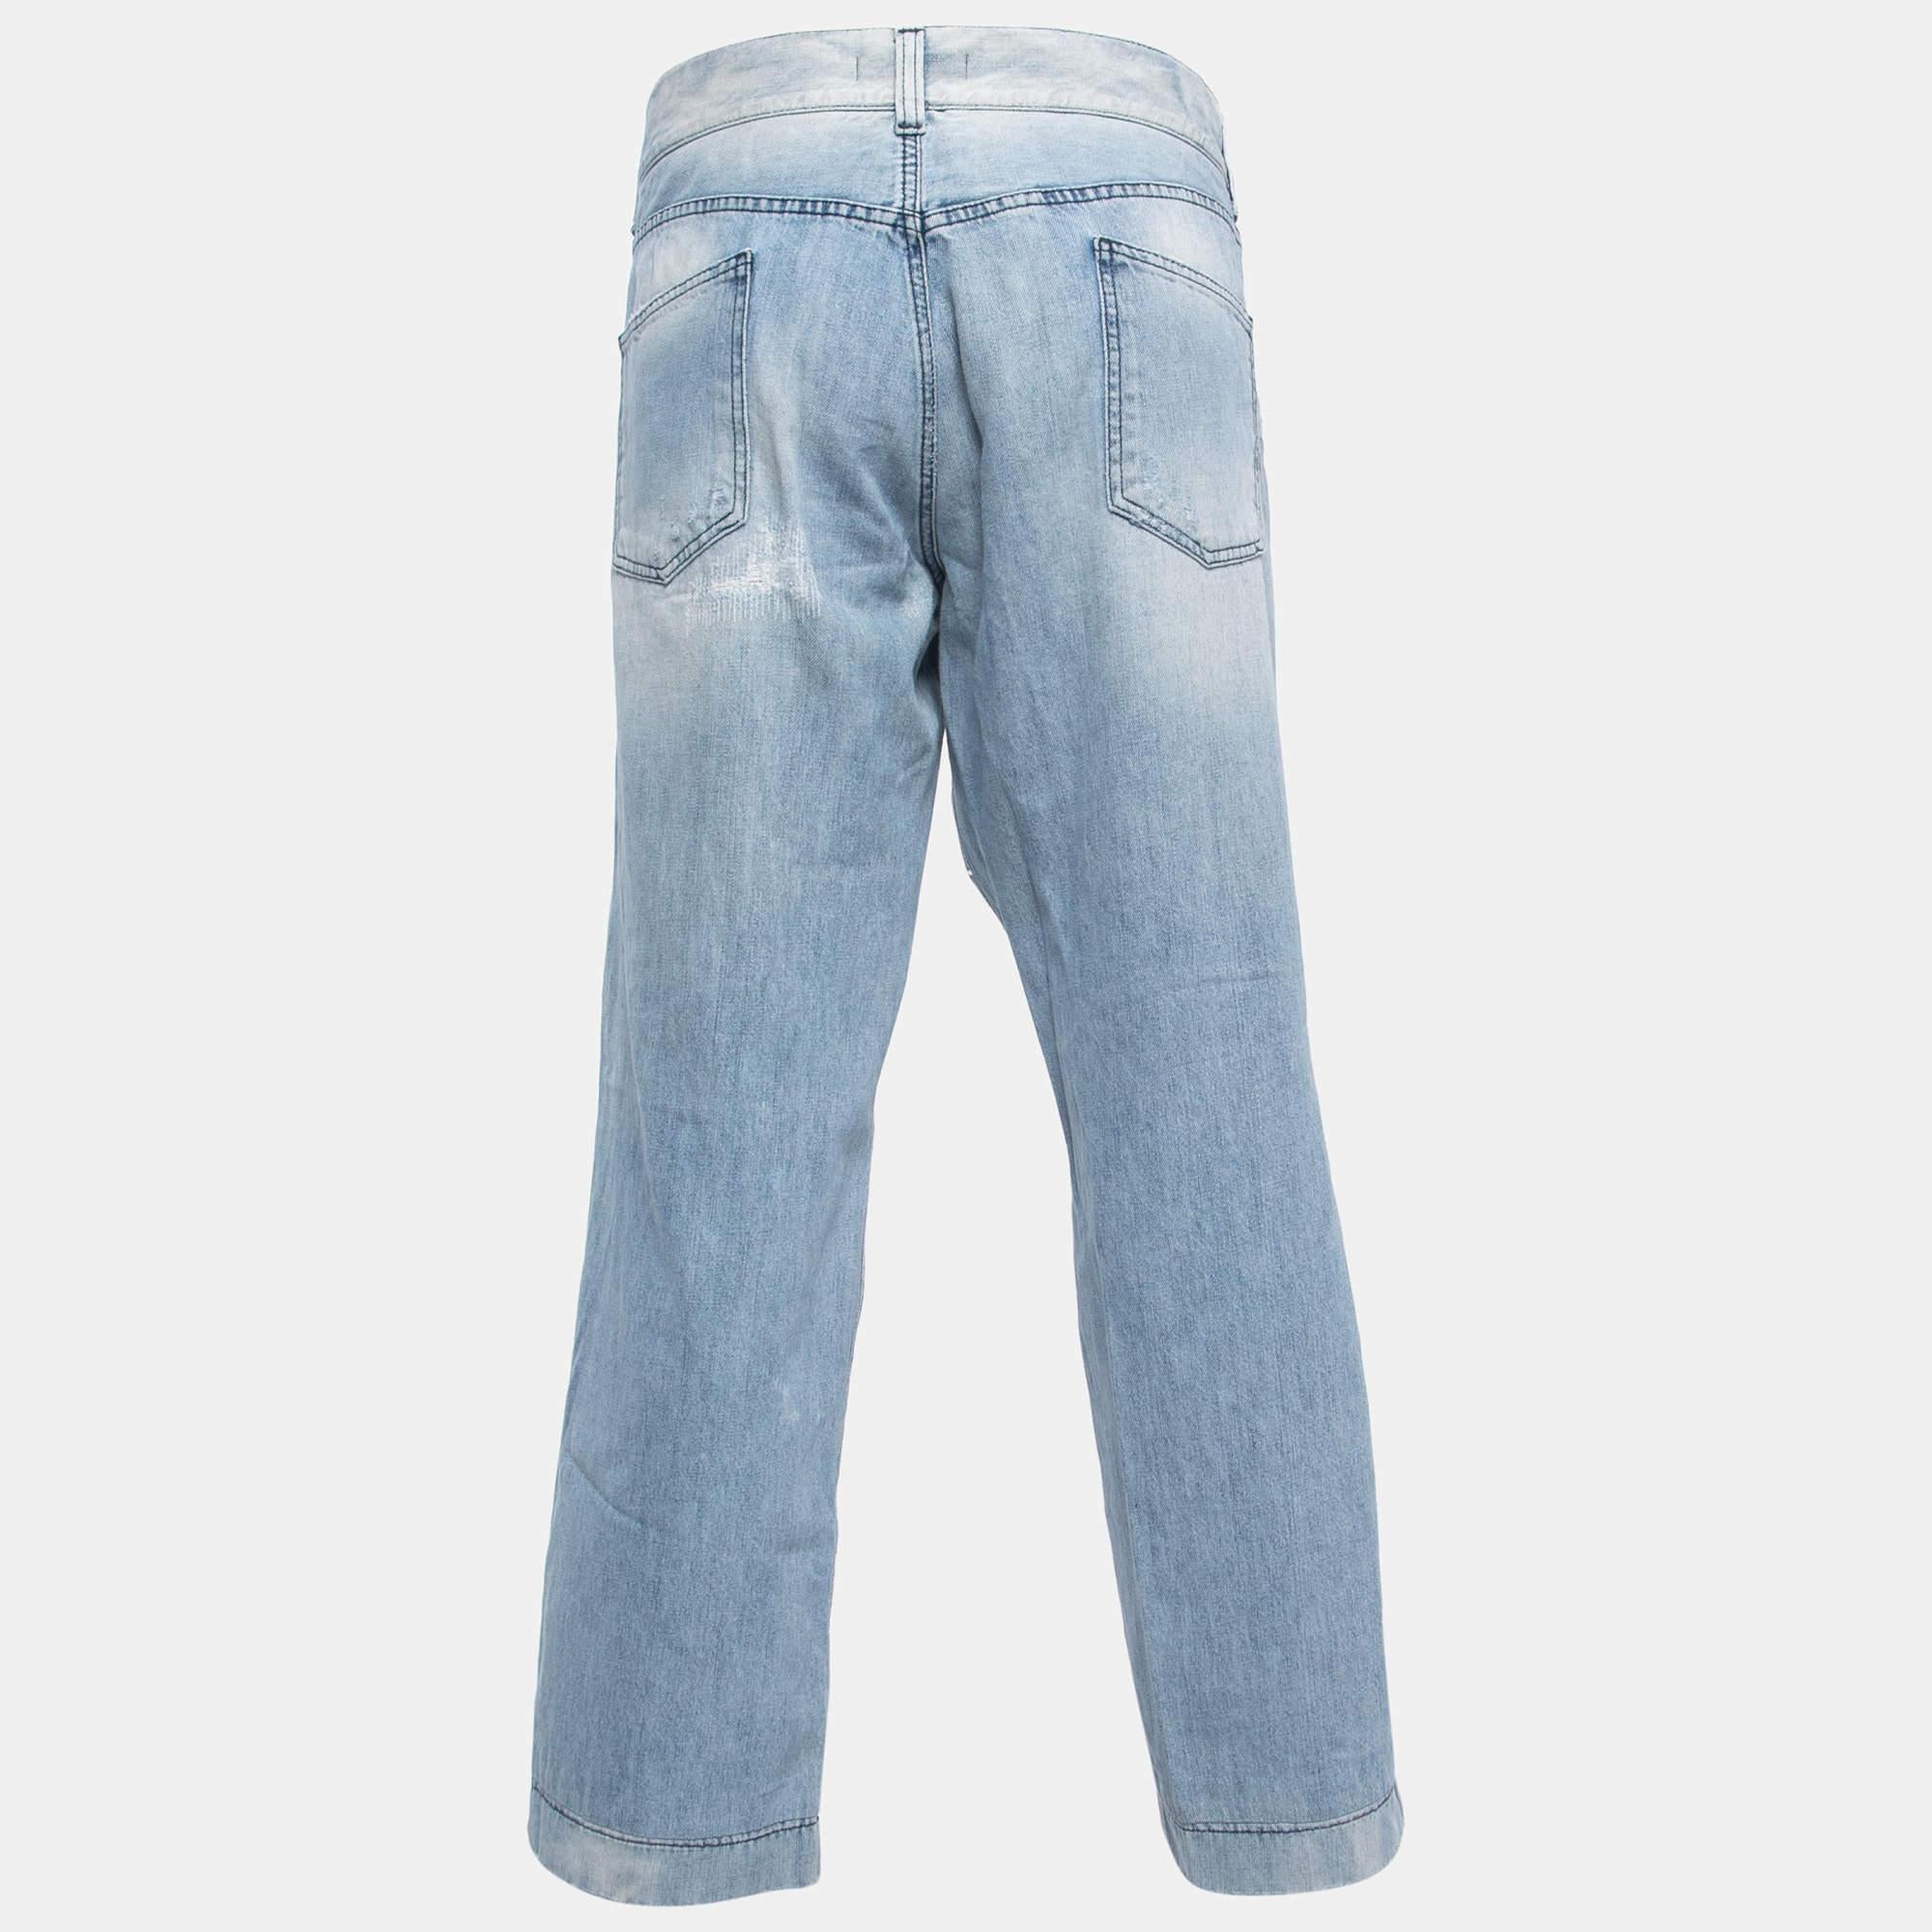 Your wardrobe can never be complete with a great pair of jeans like this. Tailored from best materials, this pair showcases classic detailing, an easy closure style, and pockets. Pair it with your casual t-shirts.

